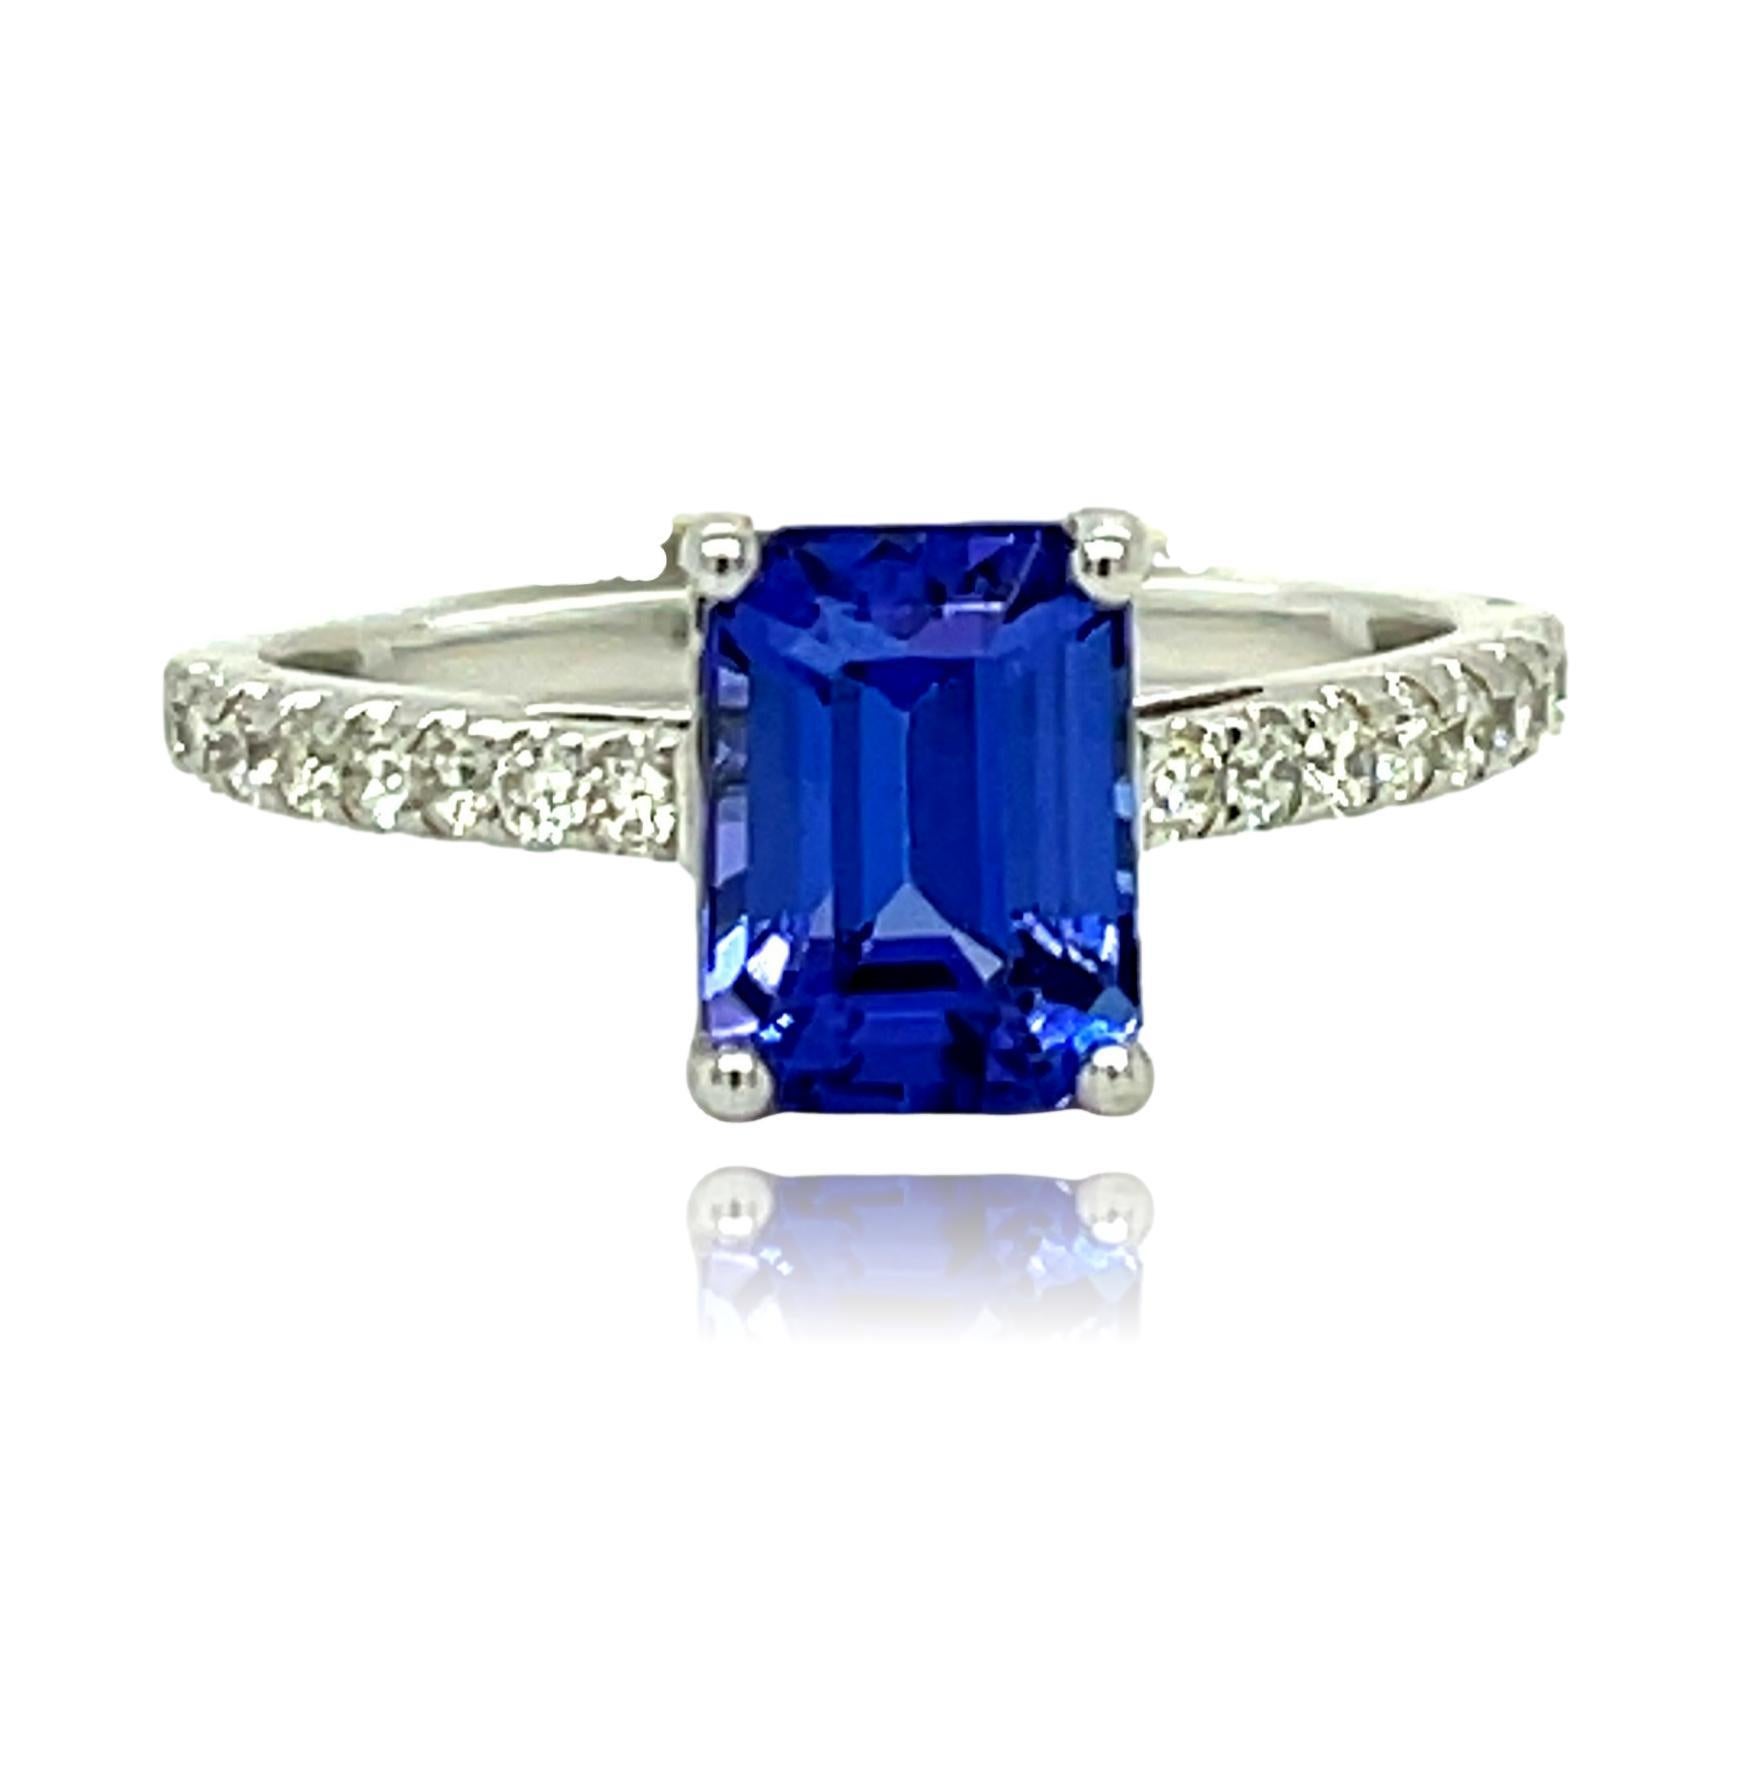 This stunning ring has a royal blue emerald cut AAA quality Tanzanite with top quality diamonds on the shank and is set in 18K white gold. It comes in a beautiful box ready for the perfect gift!

18KW:            2.65 gms
Tanz wt:         2.0